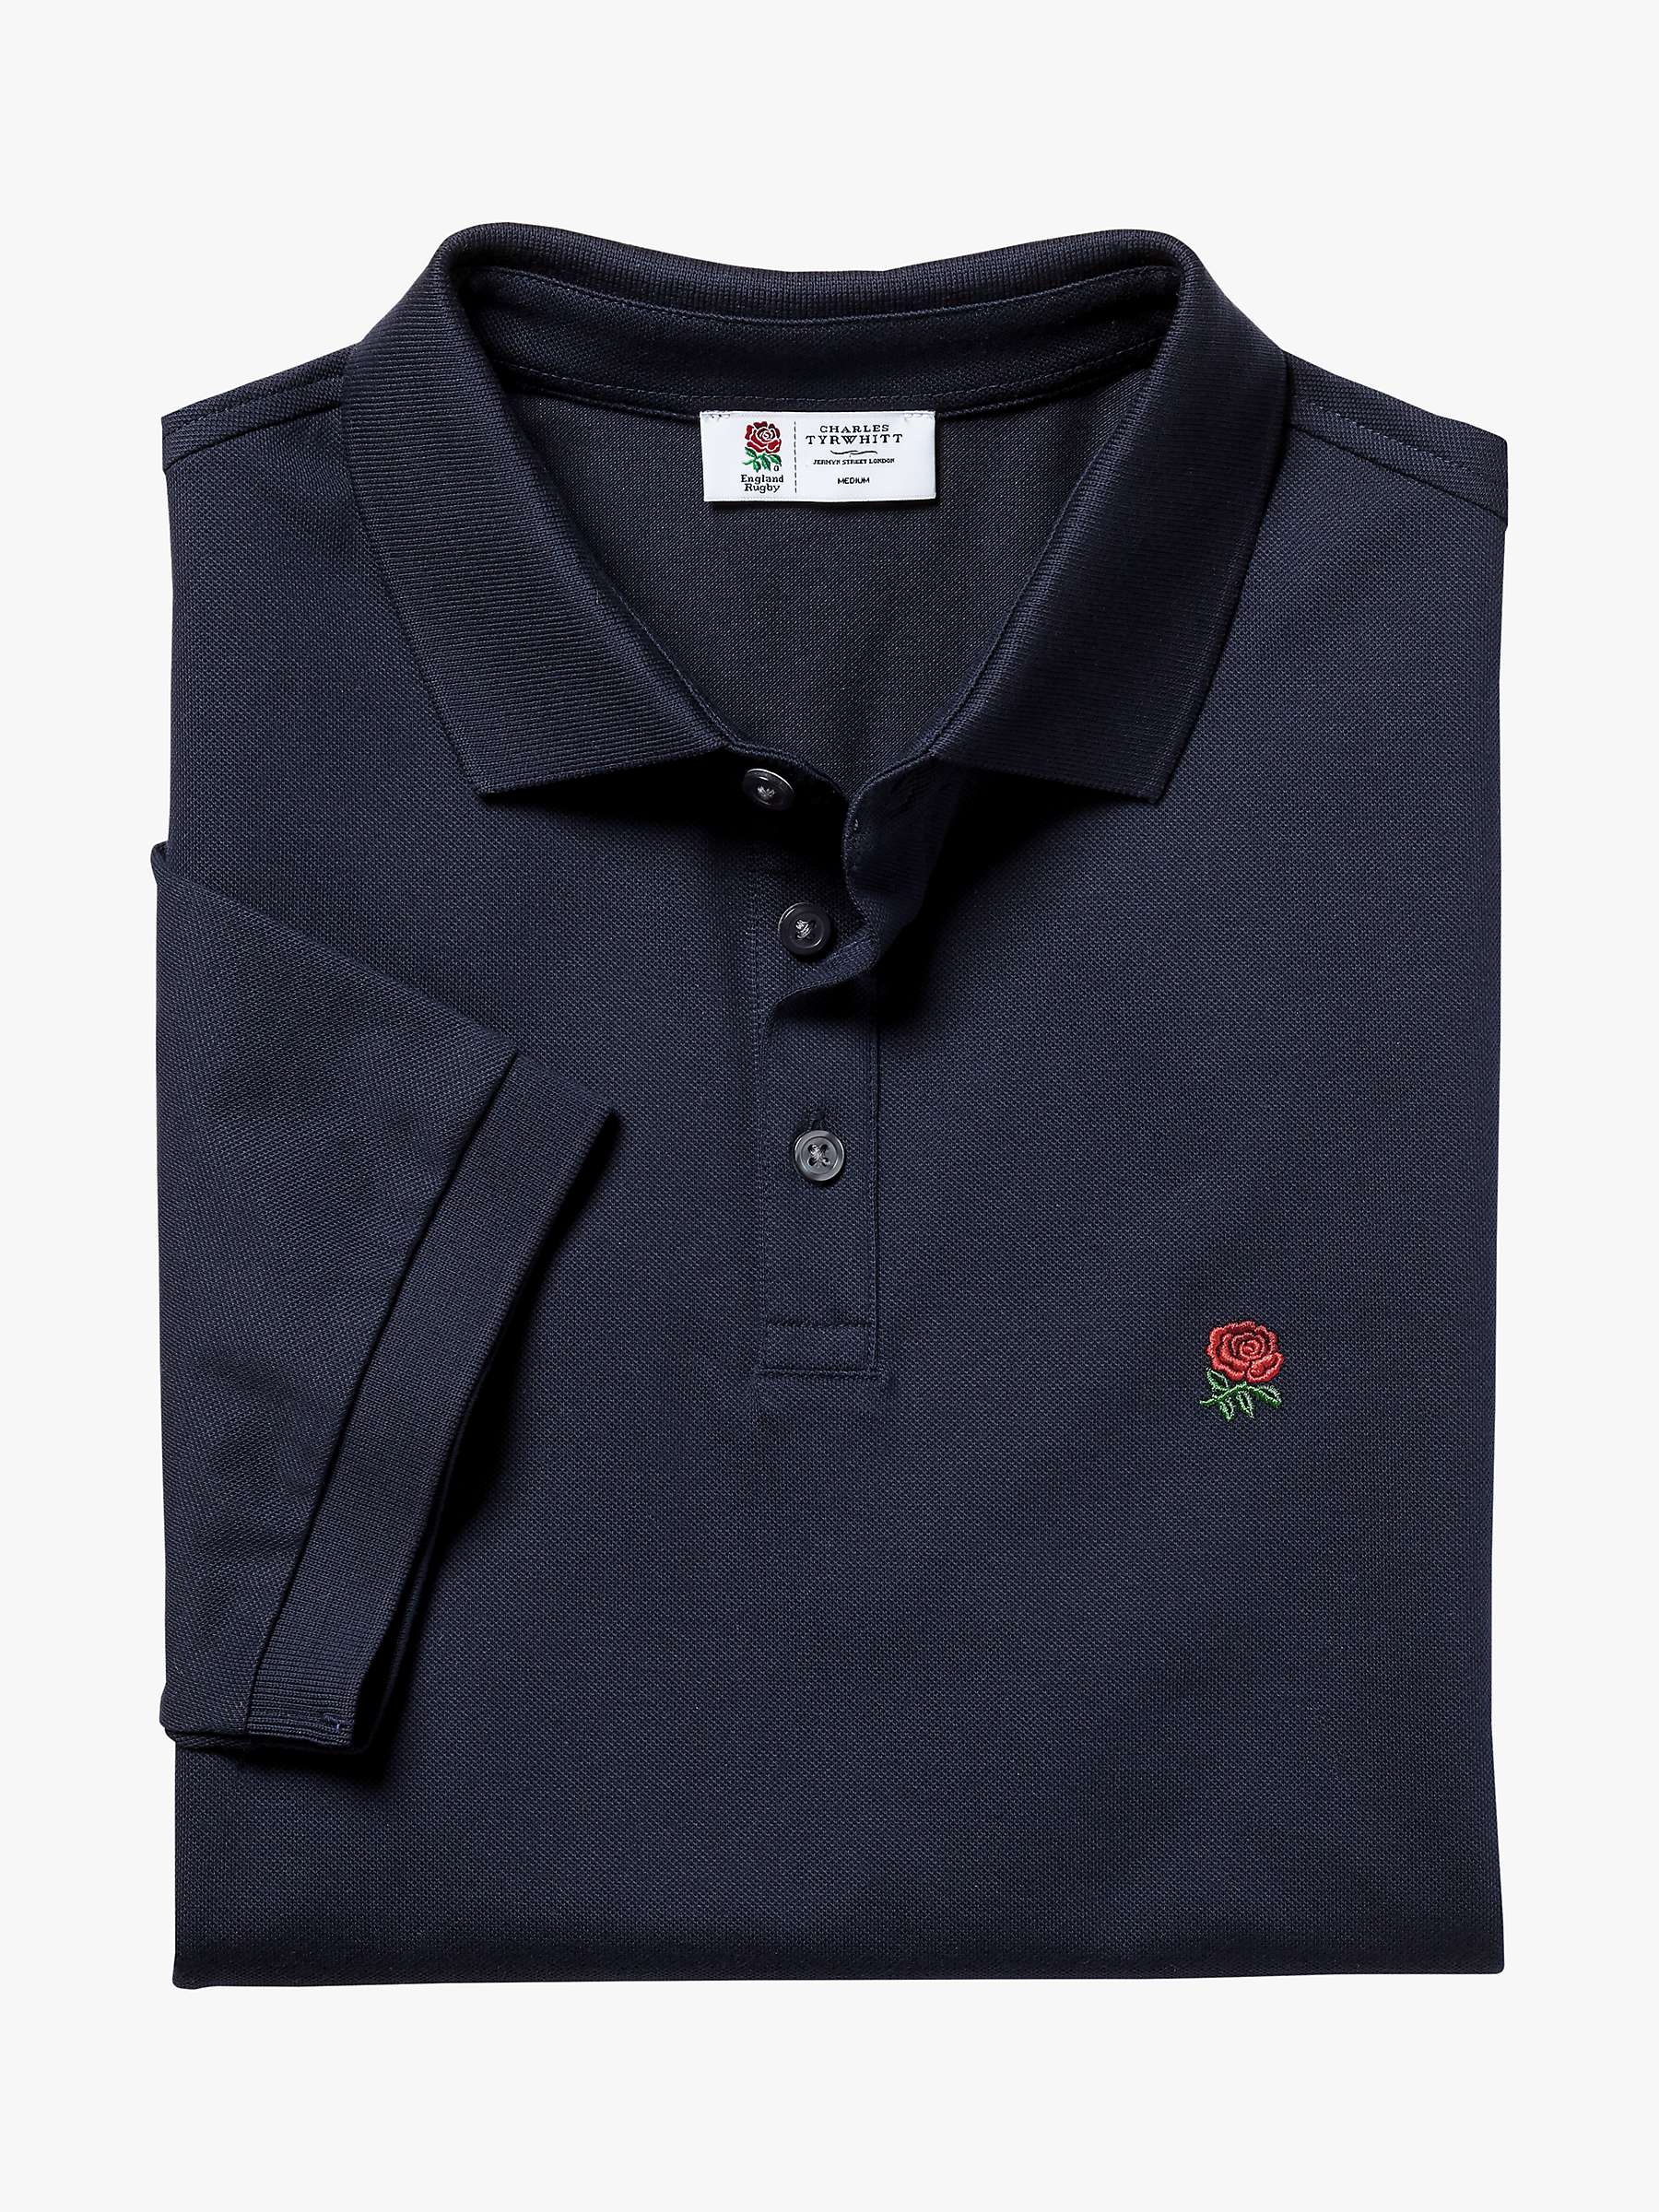 Buy Charles Tyrwhitt England Rugby Pique Polo Shirt Online at johnlewis.com